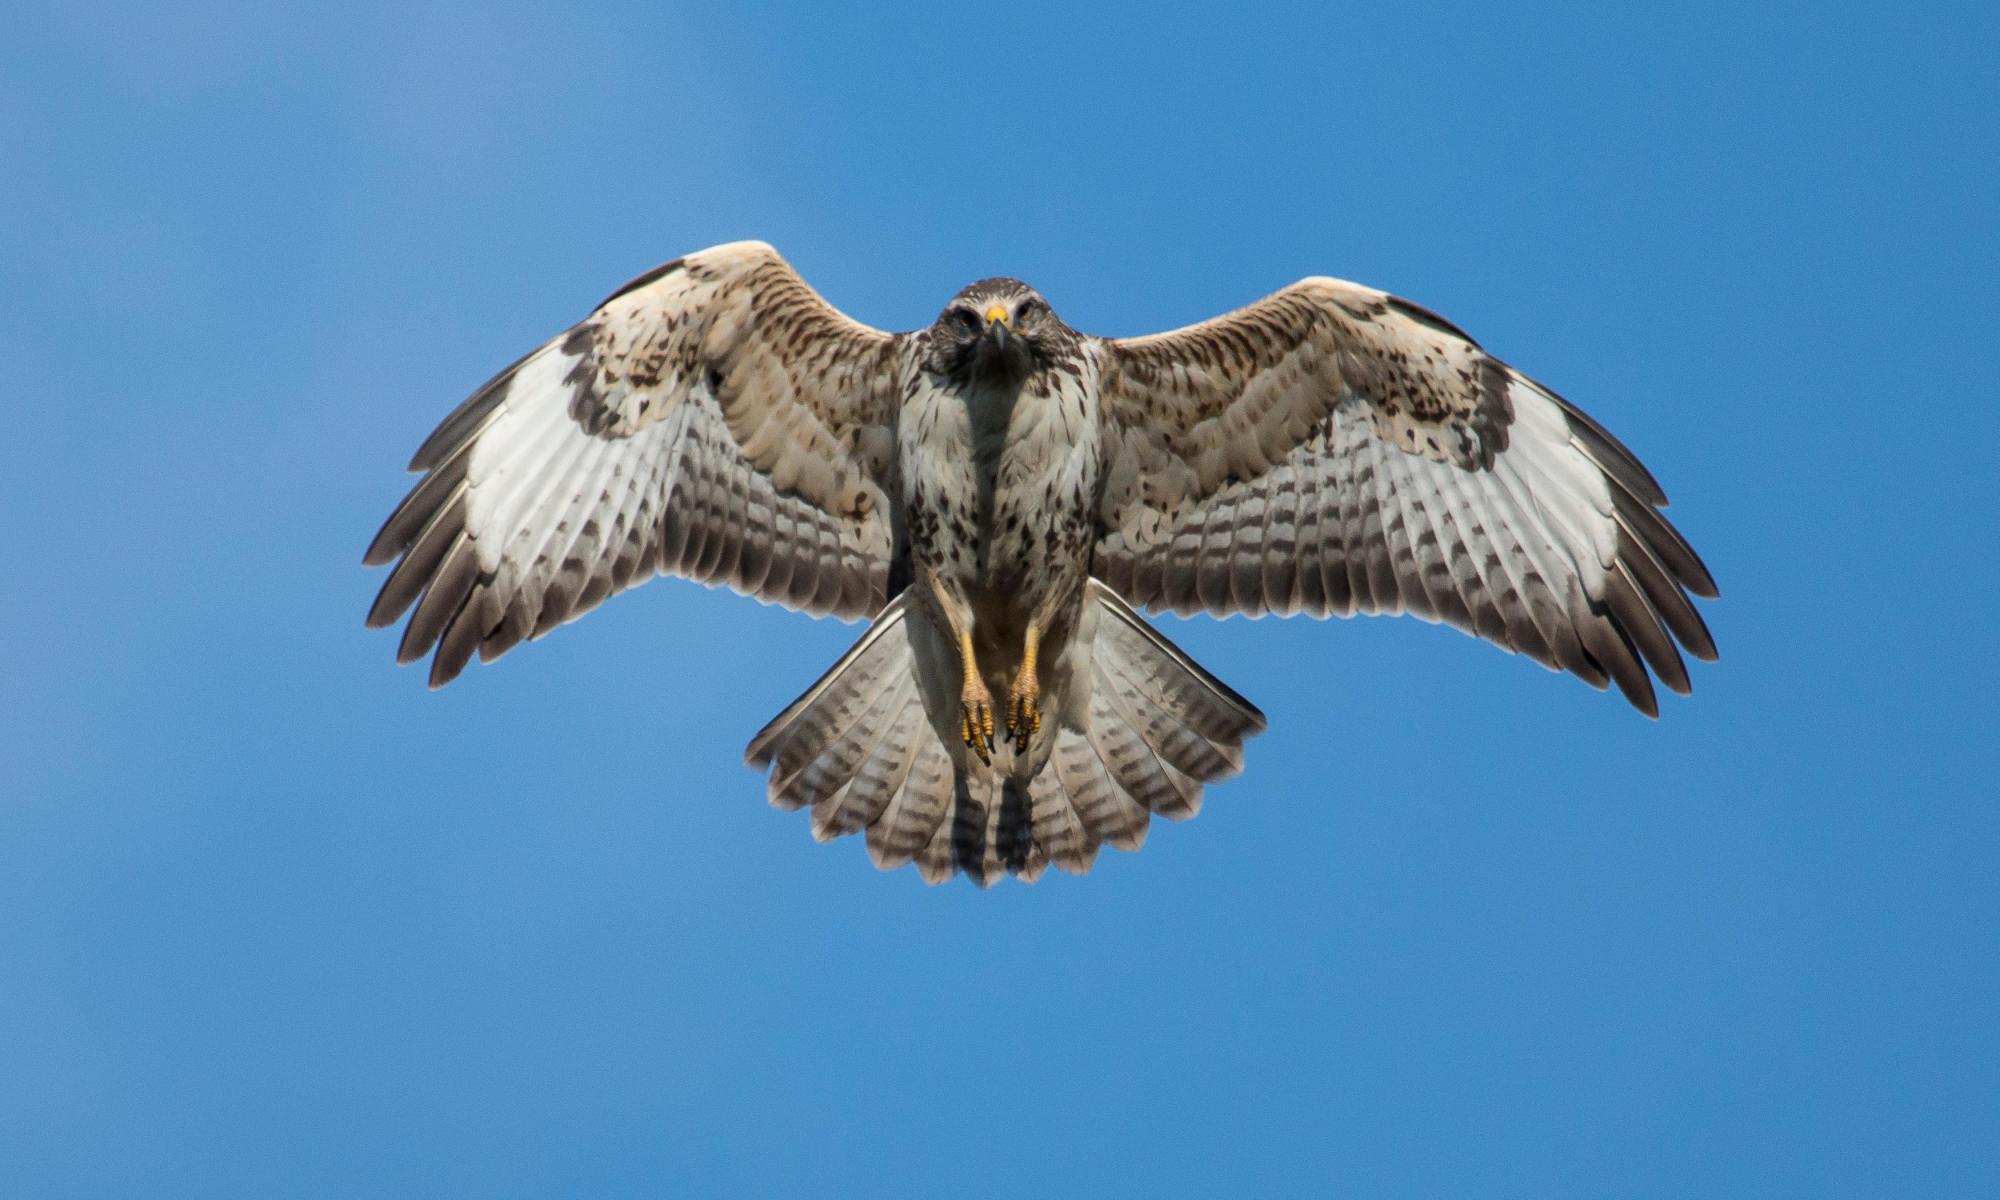 Country diary: there's a buzzard in the air